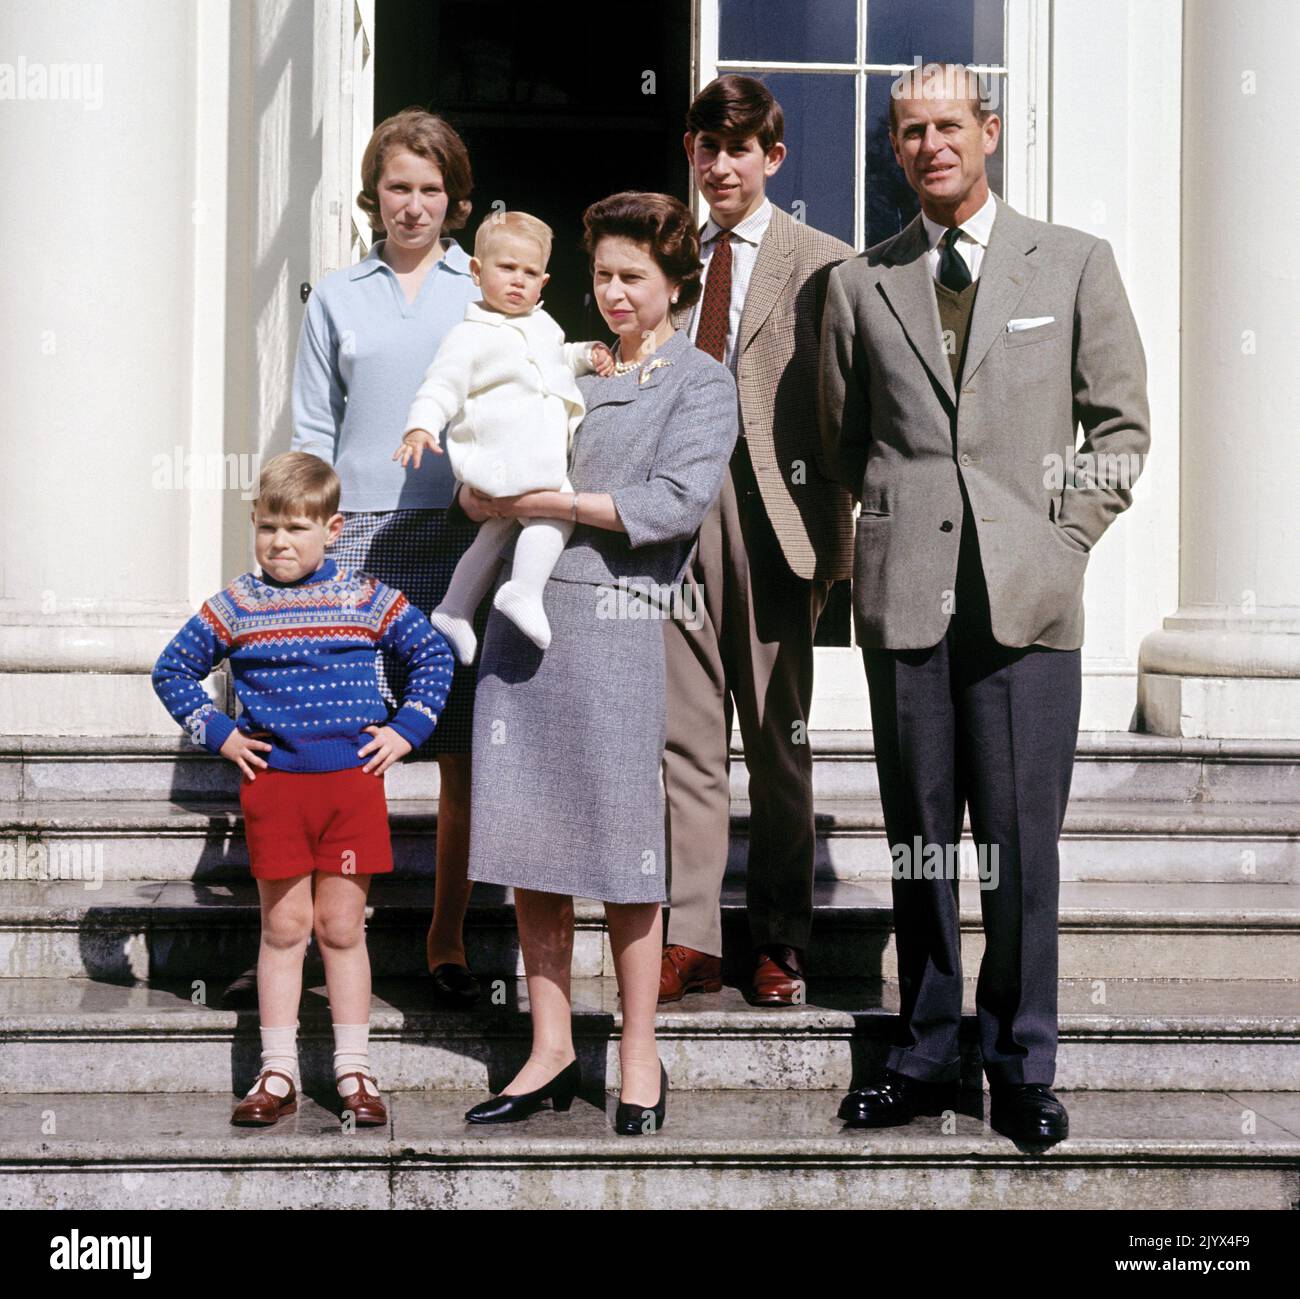 File photo dated 21/04/1965 of Queen Elizabeth II holding Prince Edward and surrounded by her family, the Duke of Edinburgh (right), the Prince of Wales and Princess Anne (behind) and Prince Andrew (left), at Windsor on the occasion of her 39th birthday. The Queen died peacefully at Balmoral this afternoon, Buckingham Palace has announced. Issue date: Thursday September 8, 2022. Stock Photo